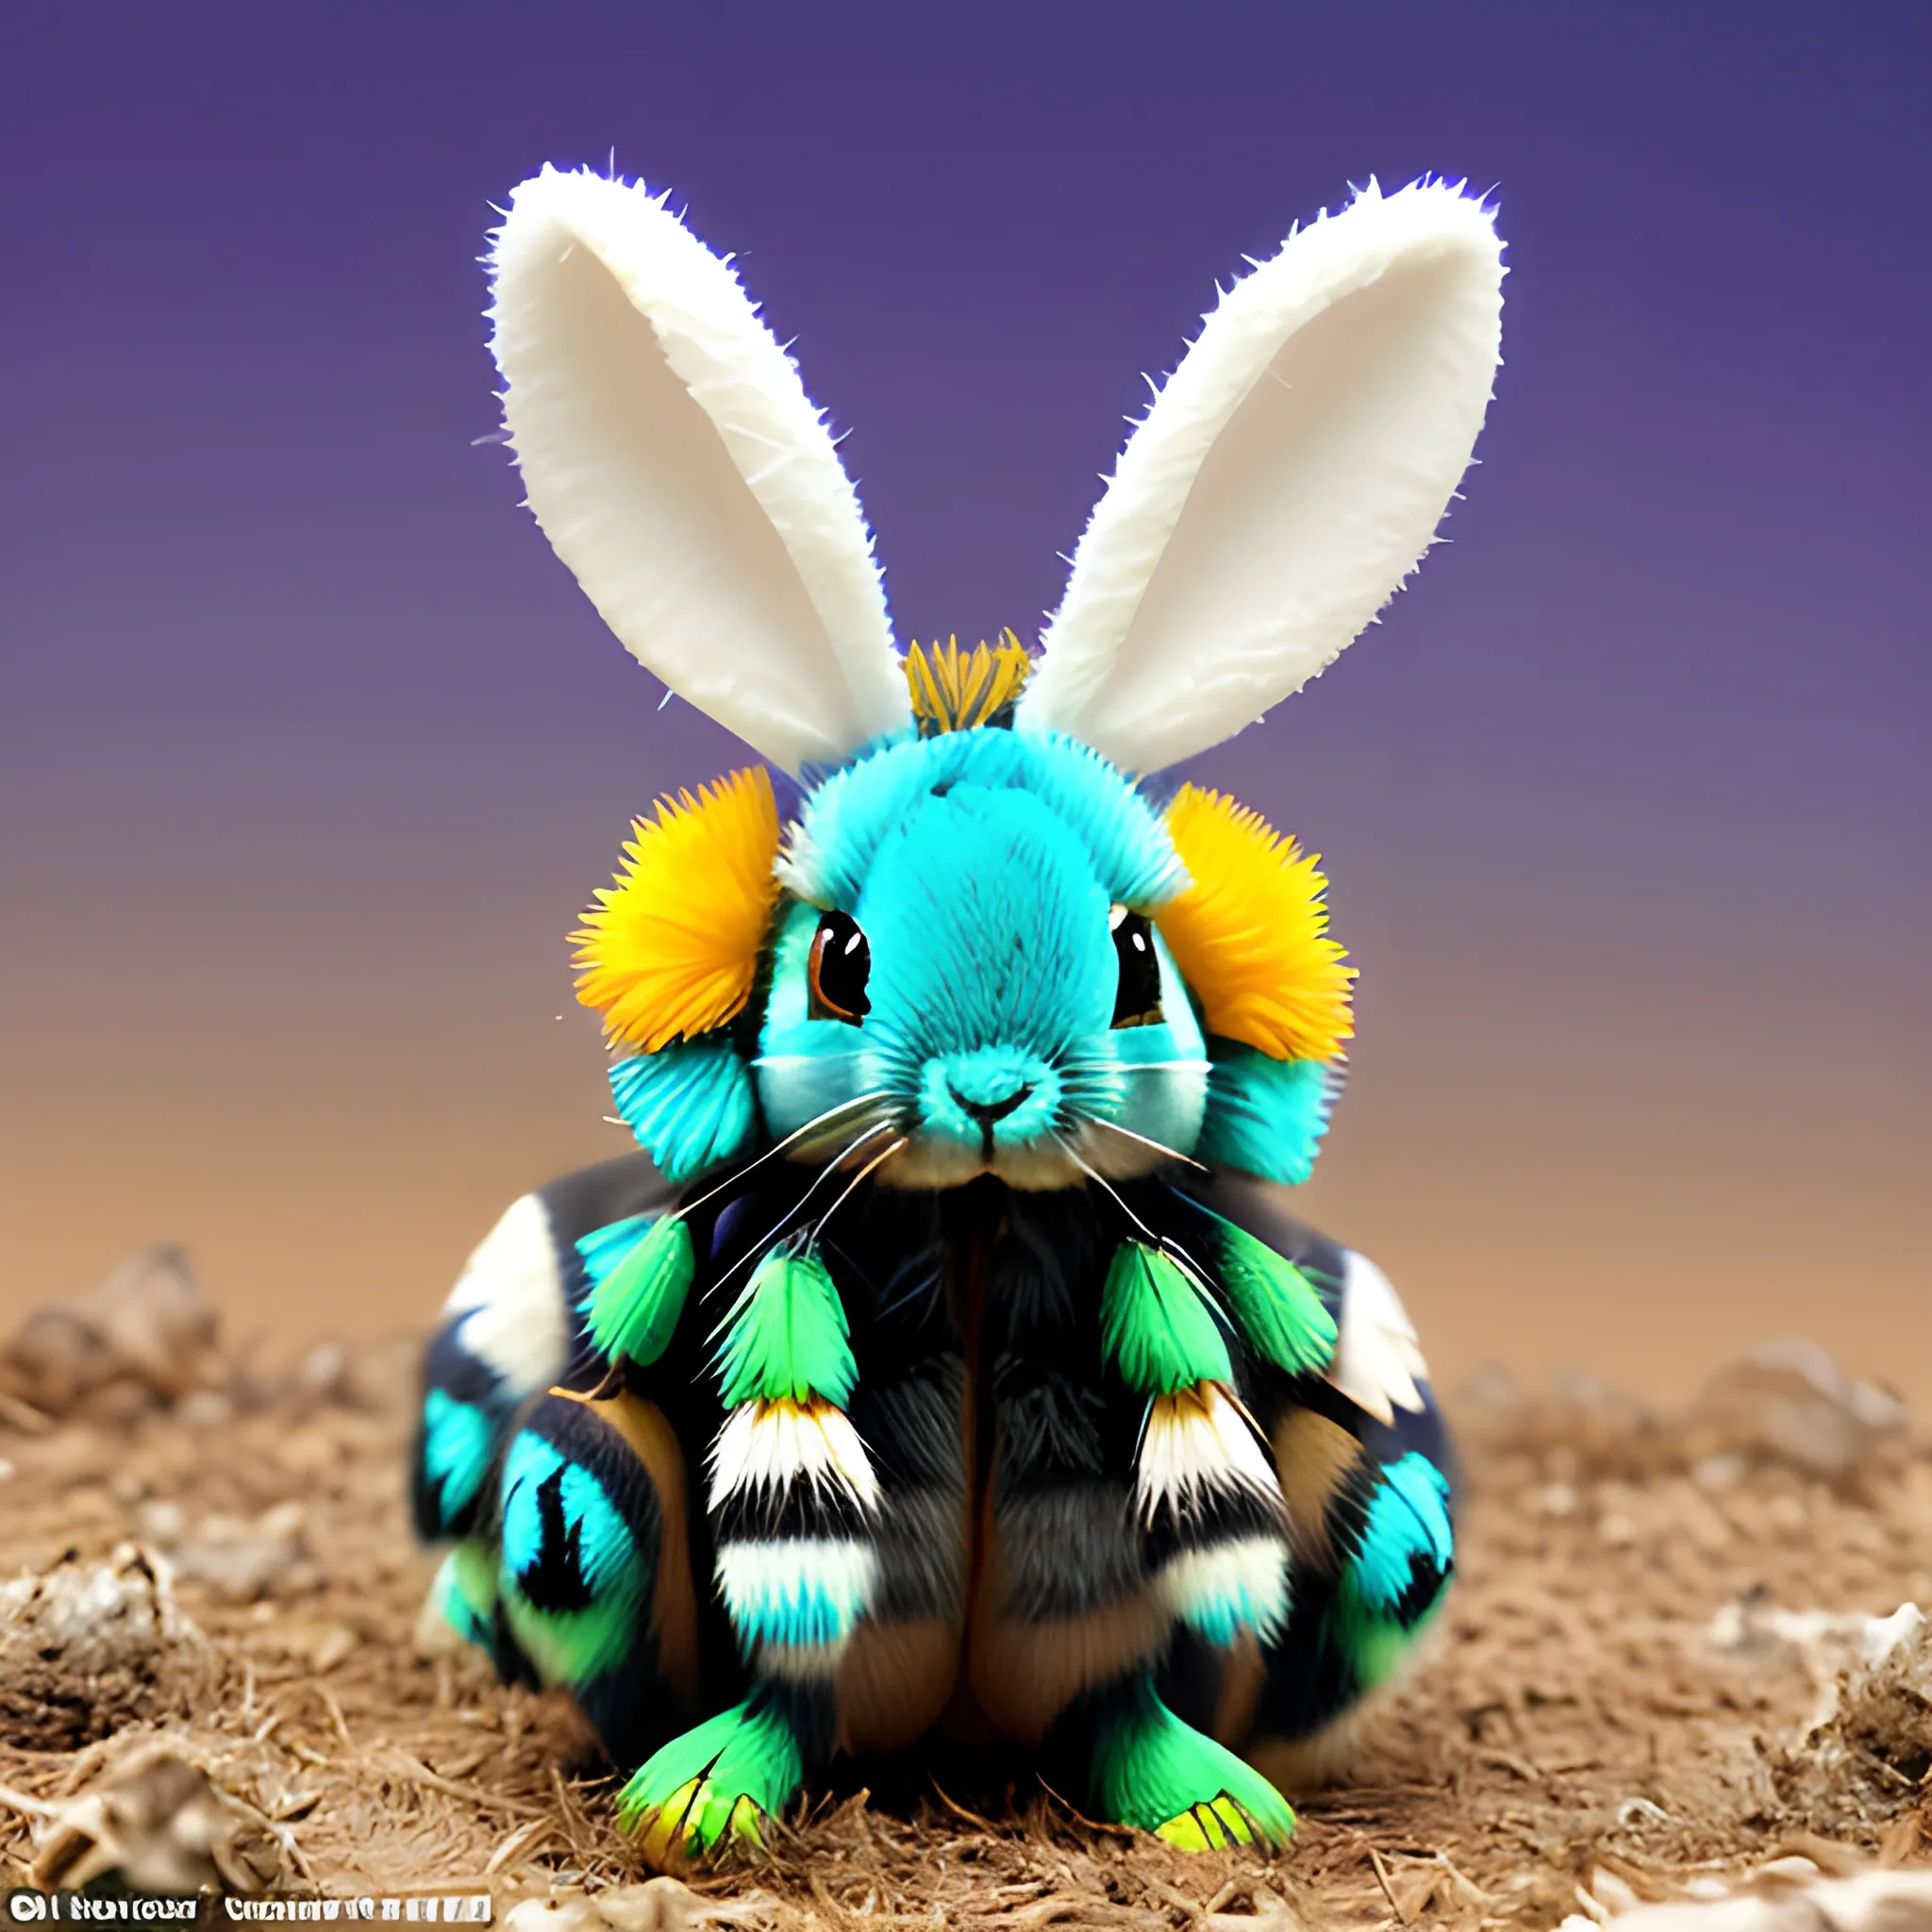 Insectile furry fluffy lapine hybrid of rabbit and bumblebee, with blue and green and white stripes, with bunny ears and butterfly wings, with predatory mandibles and segmented body and six jointed legs with tube feet, with brightly coloured eggs, on rough scrubland, at night, very detailed, Trippy
